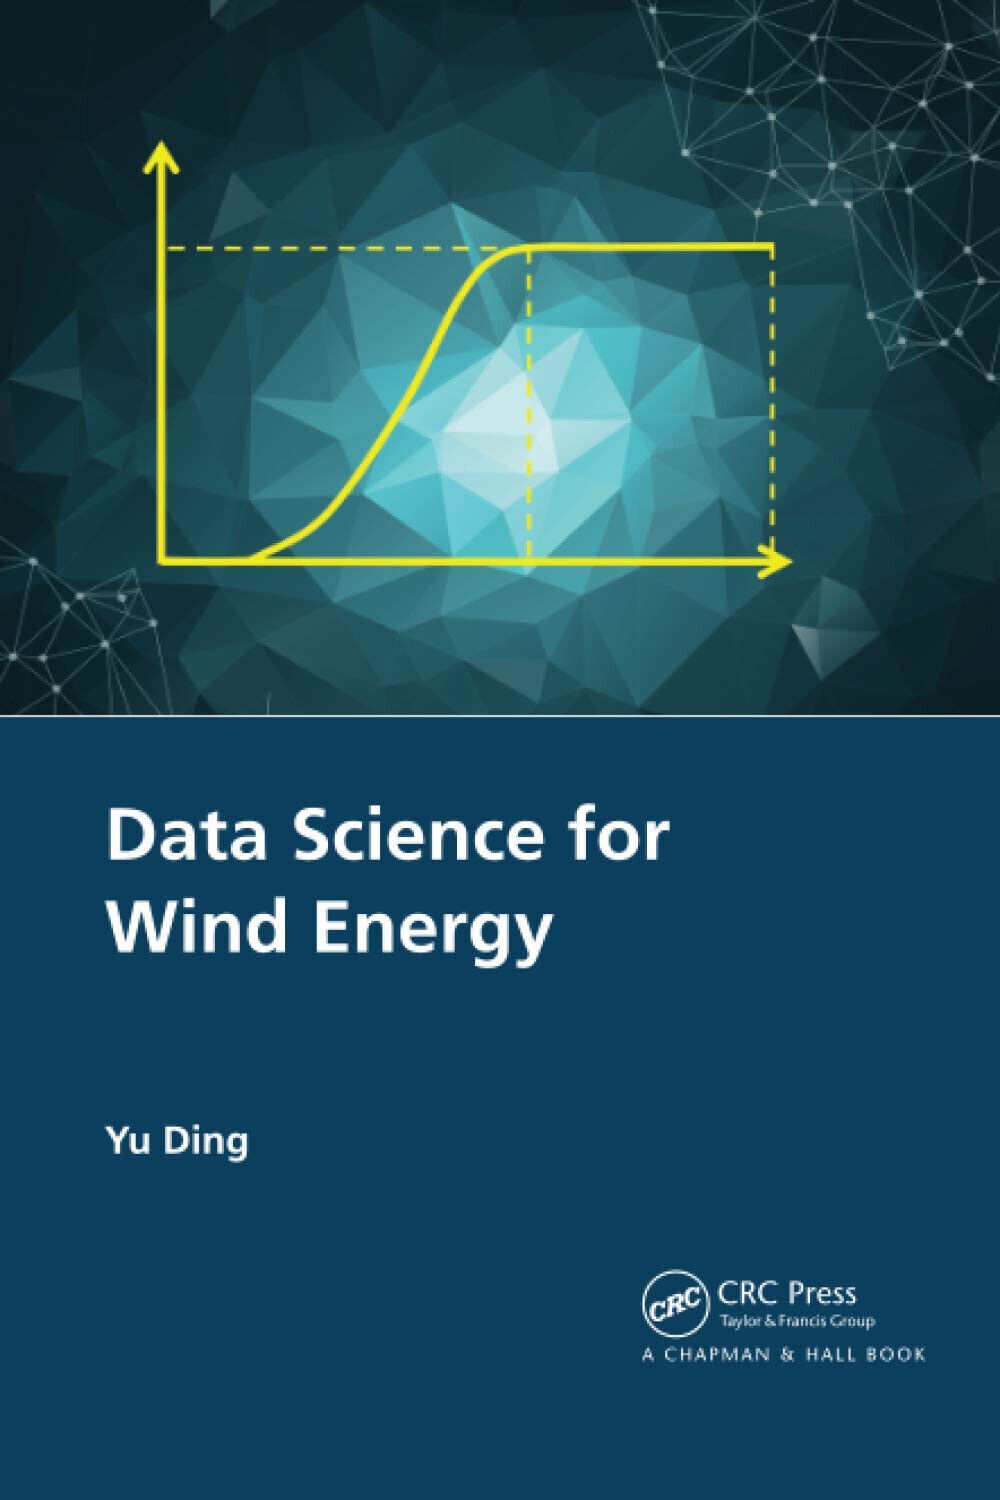 Data Science For Wind Energy - Yu Ding - CRC Press, 2020